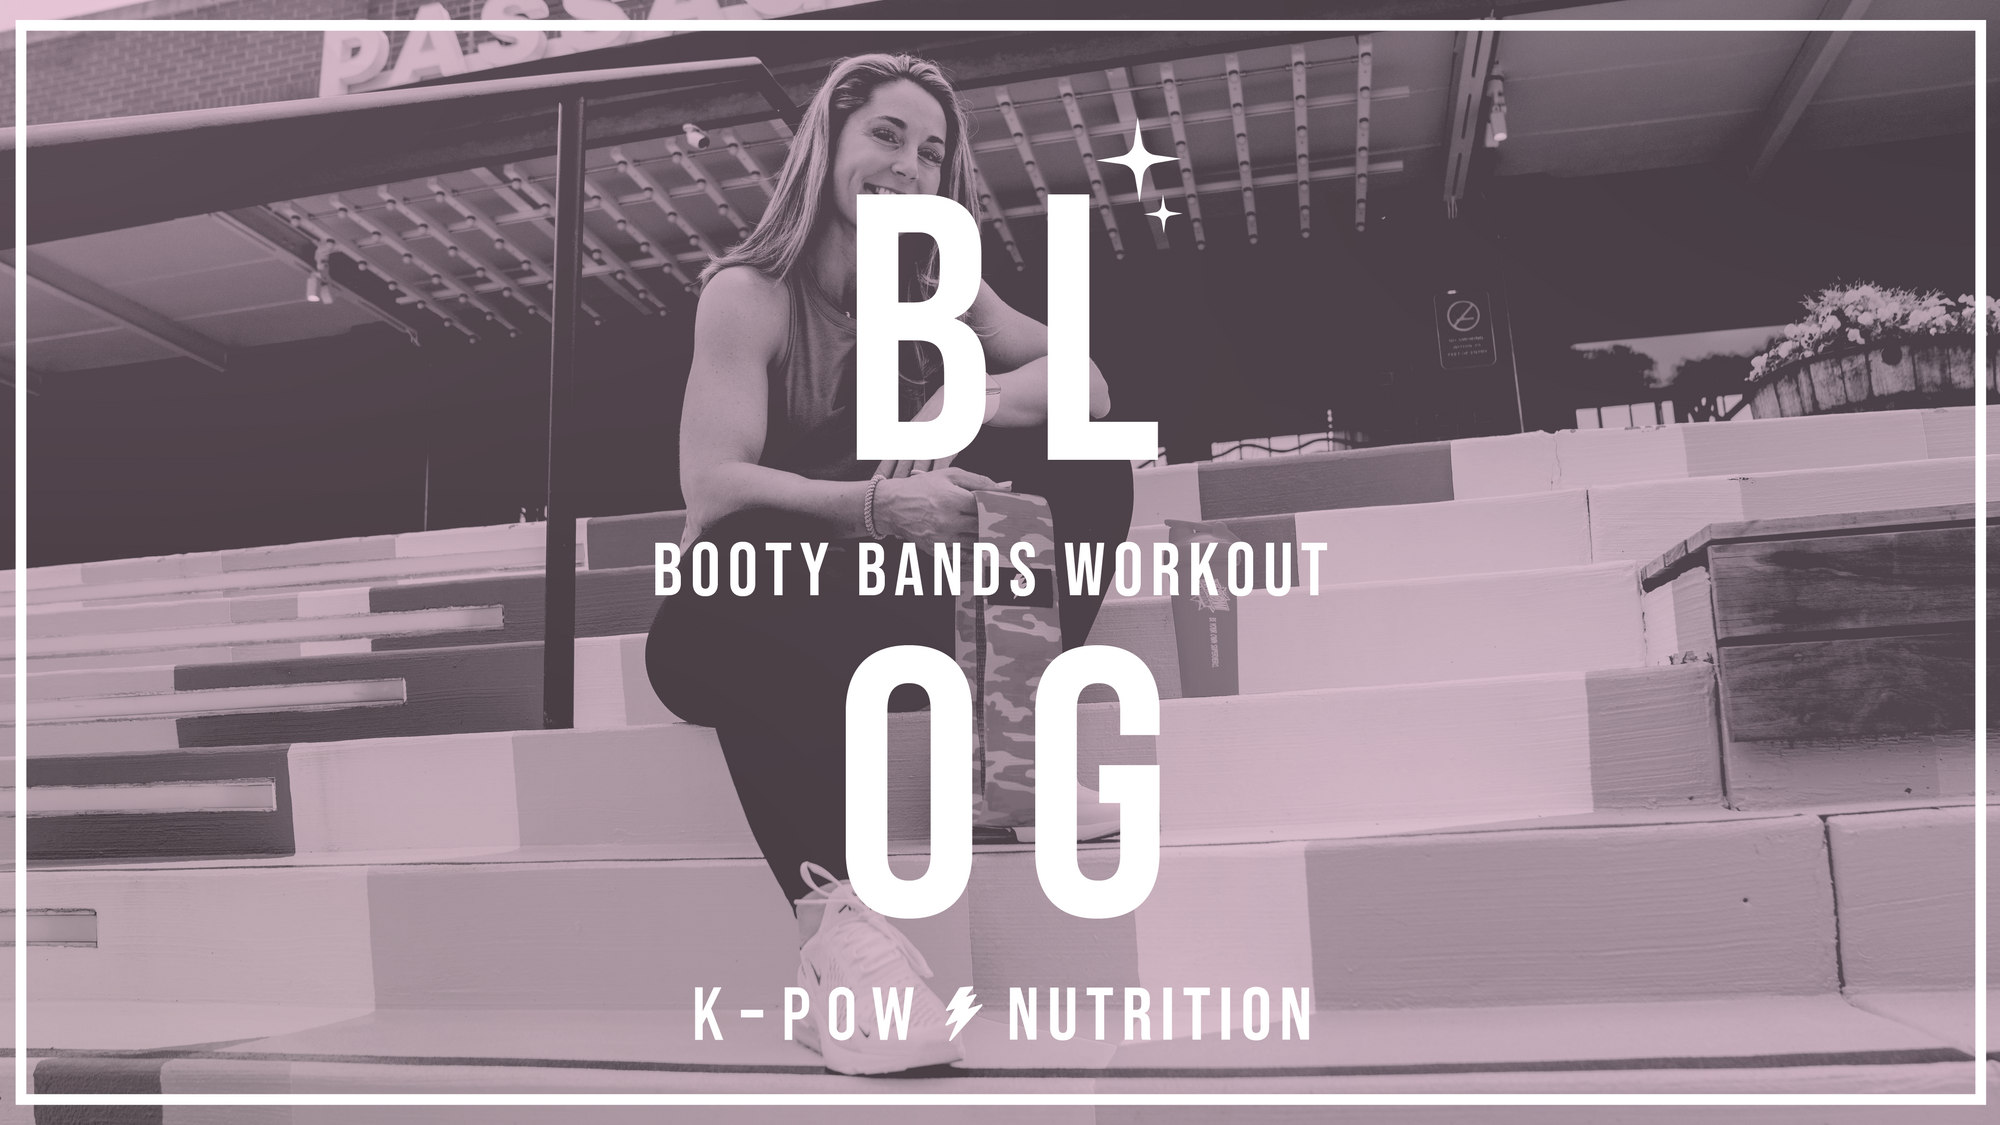 KPOW Booty Band Workout